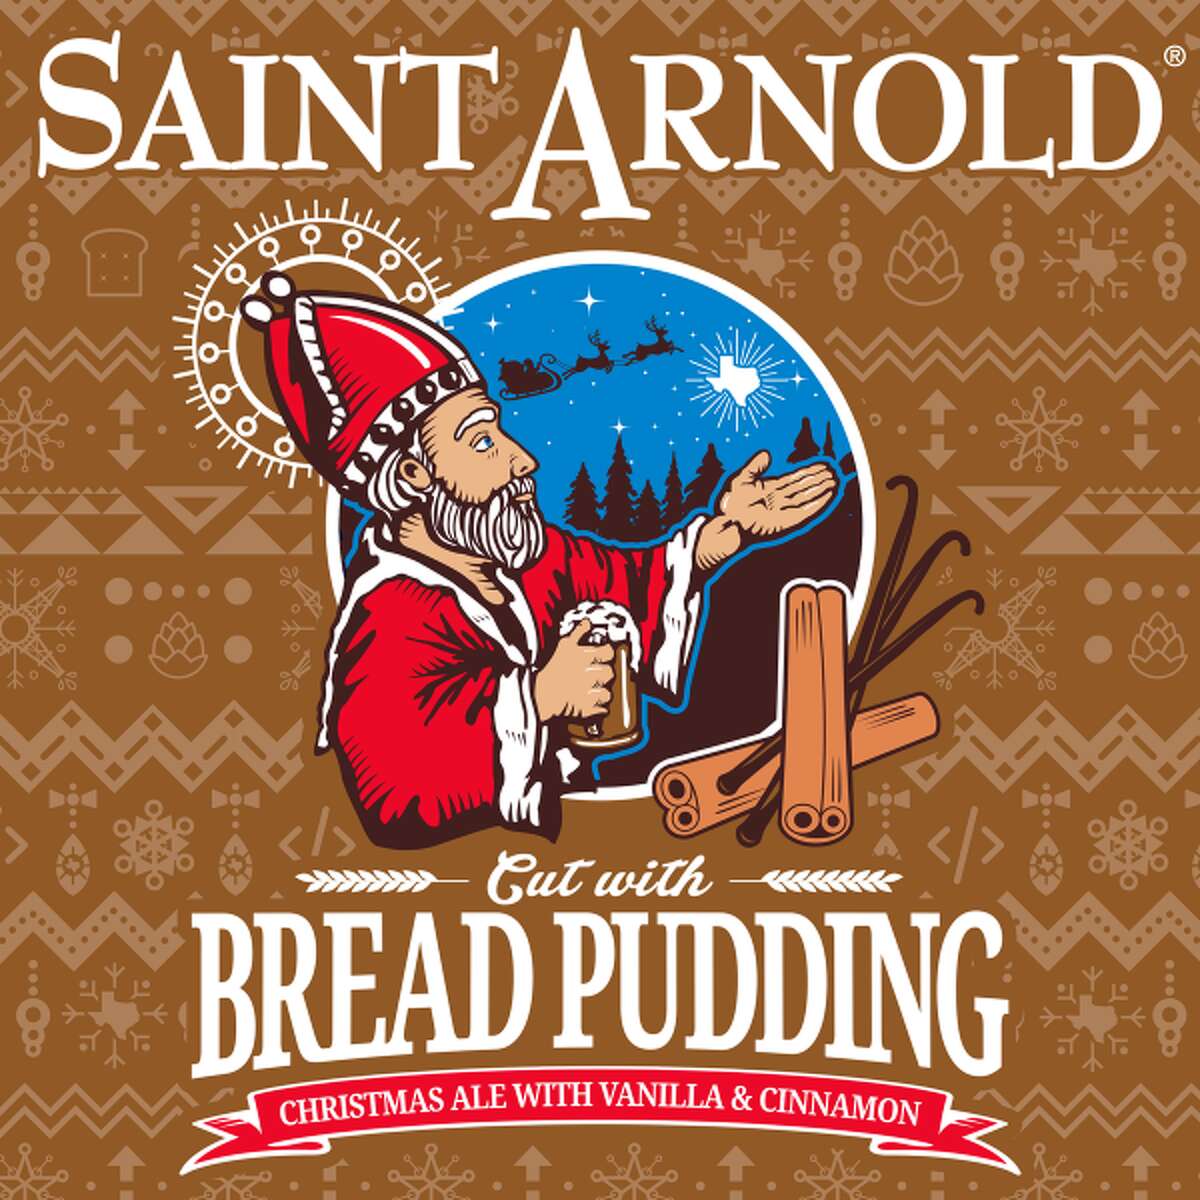 Houston's Saint Arnold Brewing Company has produced a new beer named after a disparaging comment made on Reddit more than three years ago.